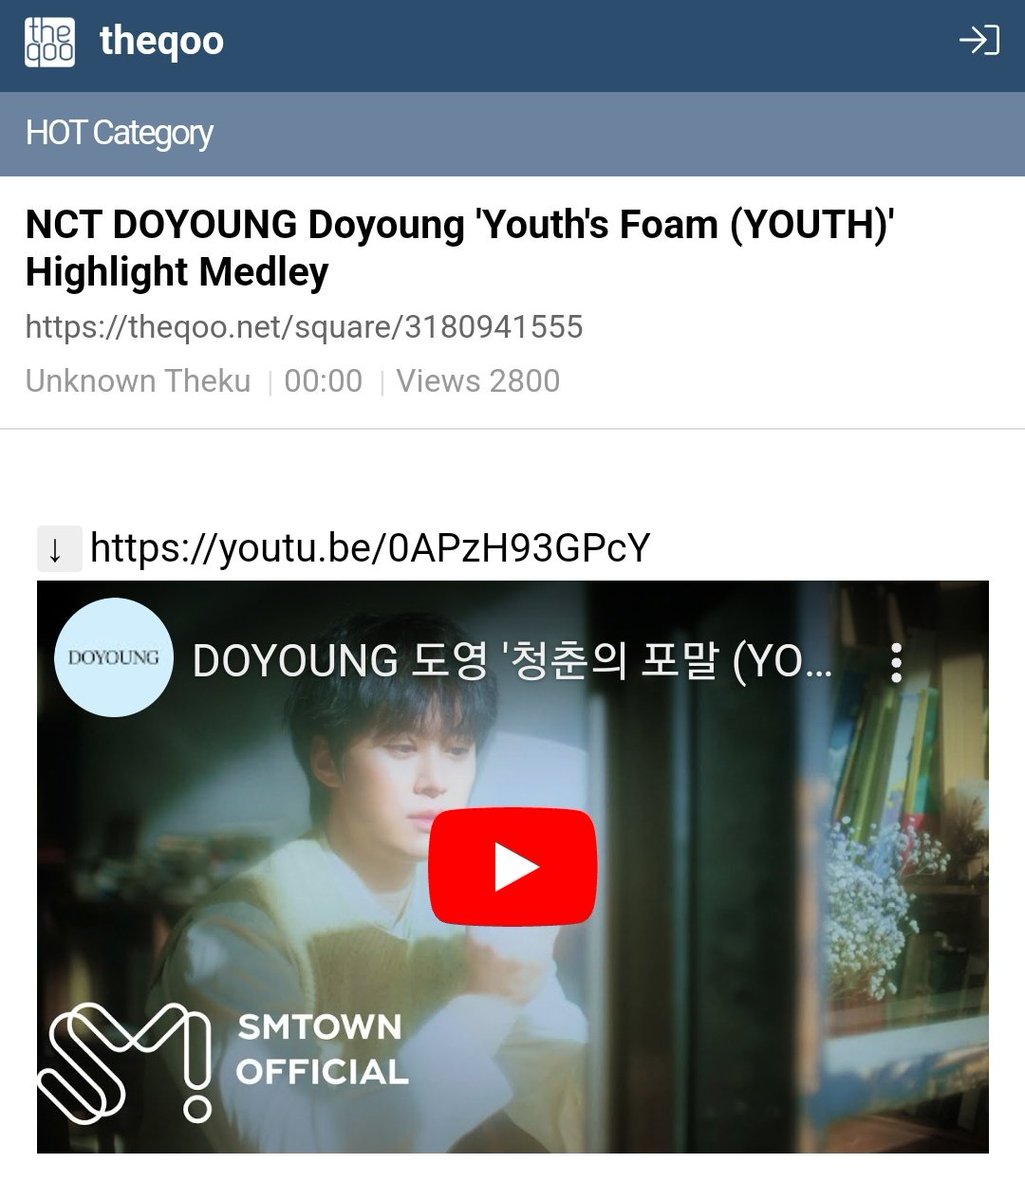 240413 #DOYOUNG Youth Highlight Medley is now a Hot Topic on theqoo! 💙 🔗 theqoo.net/hot/3180941555 YOUTH HIGHLIGHT MEDLEY #DOYOUNG_YOUTH_MEDLEY #DOYOUNG_청춘의포말_YOUTH #DOLOiscoming